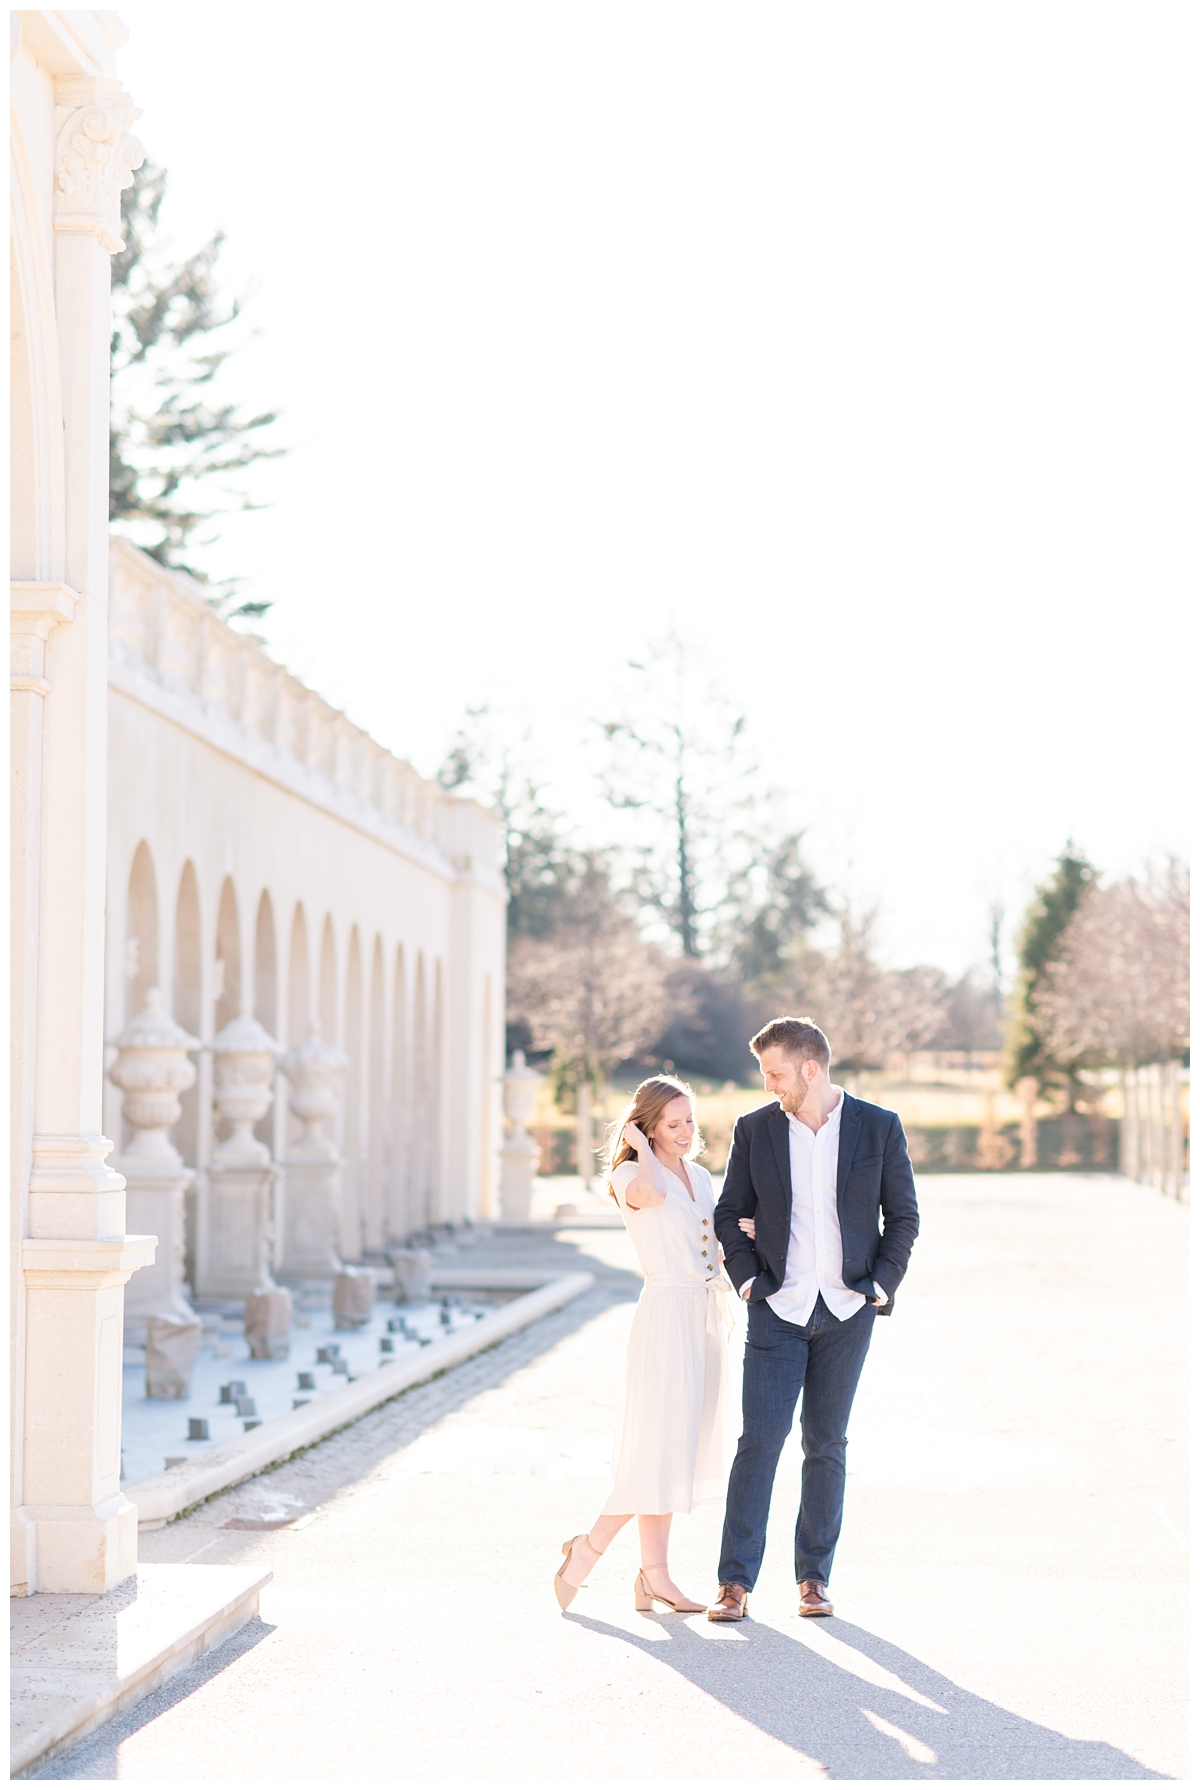 Engagement photo session at Longwood Gardens